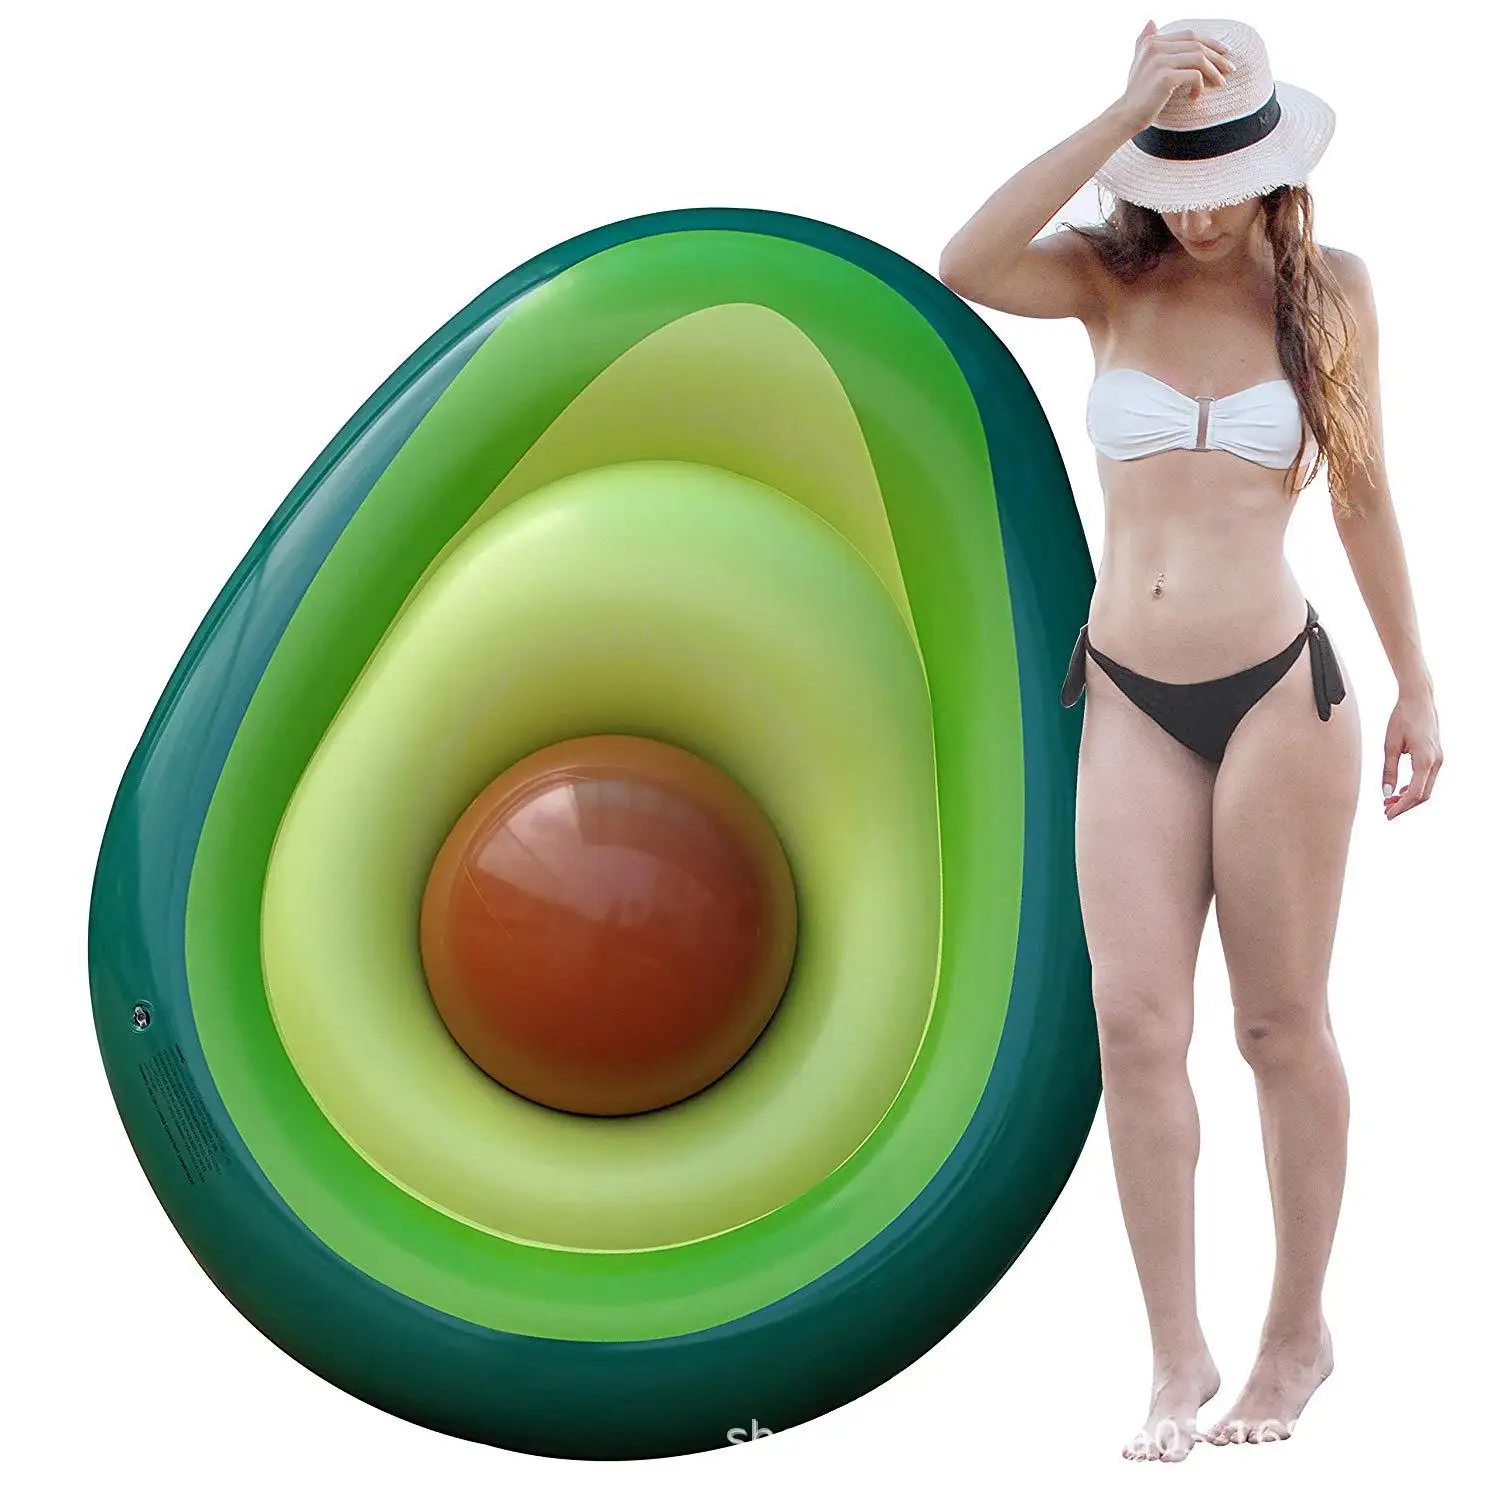 Avocado Inflatable Floating Raft Water Game Swim Ring Inflat Float Pool Inflatable Toy Adult Party inflat Raft Pool Toy Kid